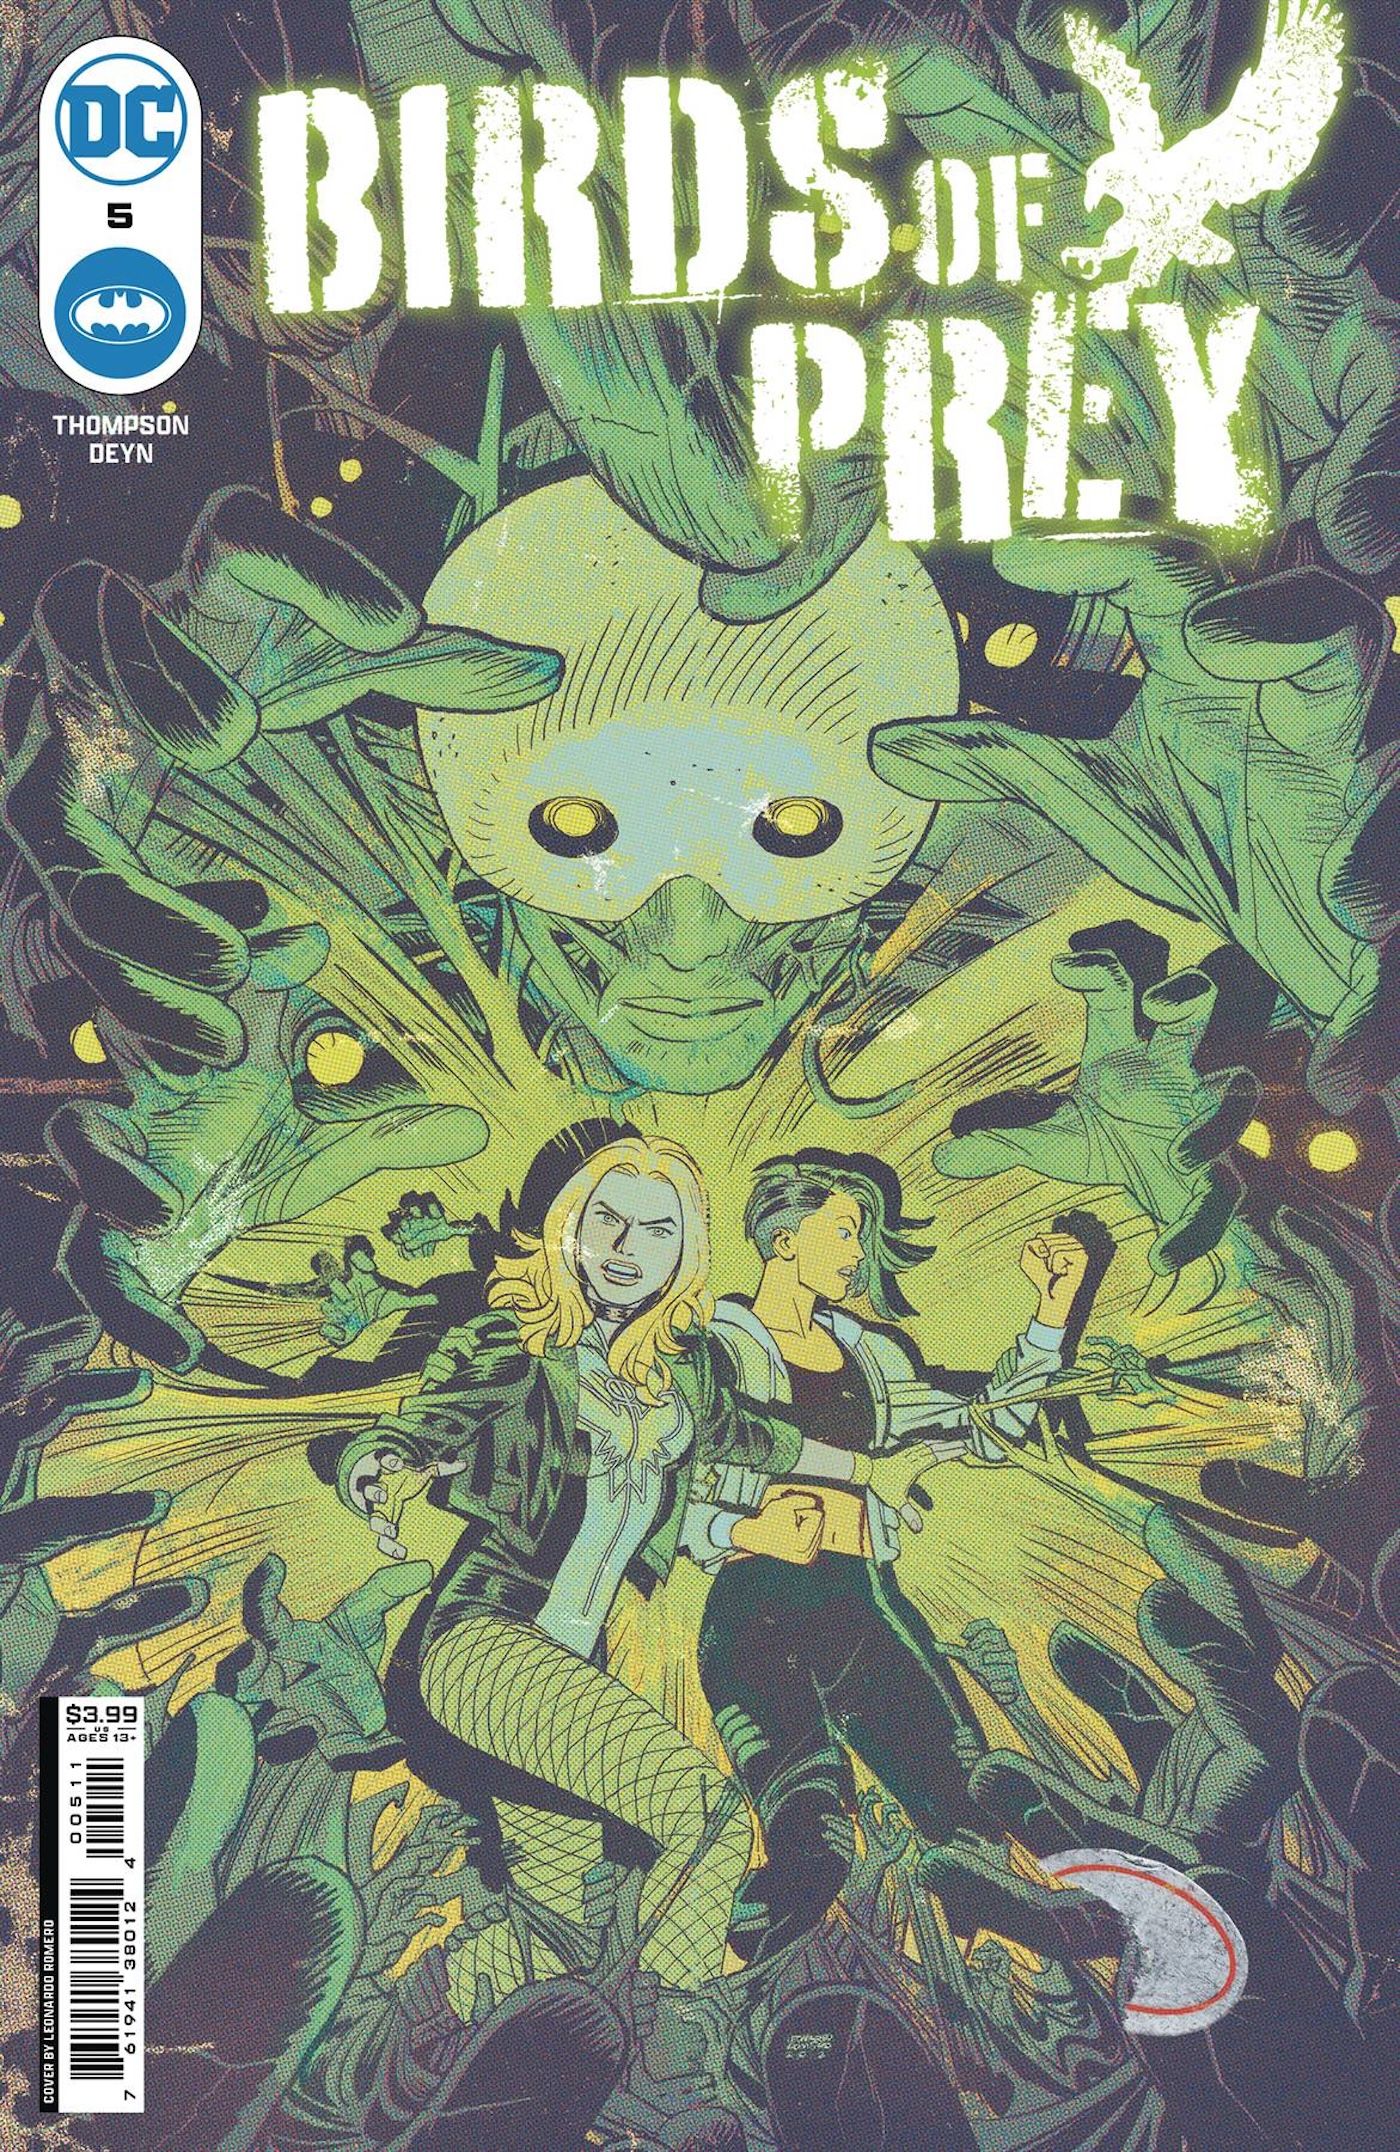 Birds of Prey 5 Main Cover: Black Canary and her sister Sin surrounded by a green monster with many hands.